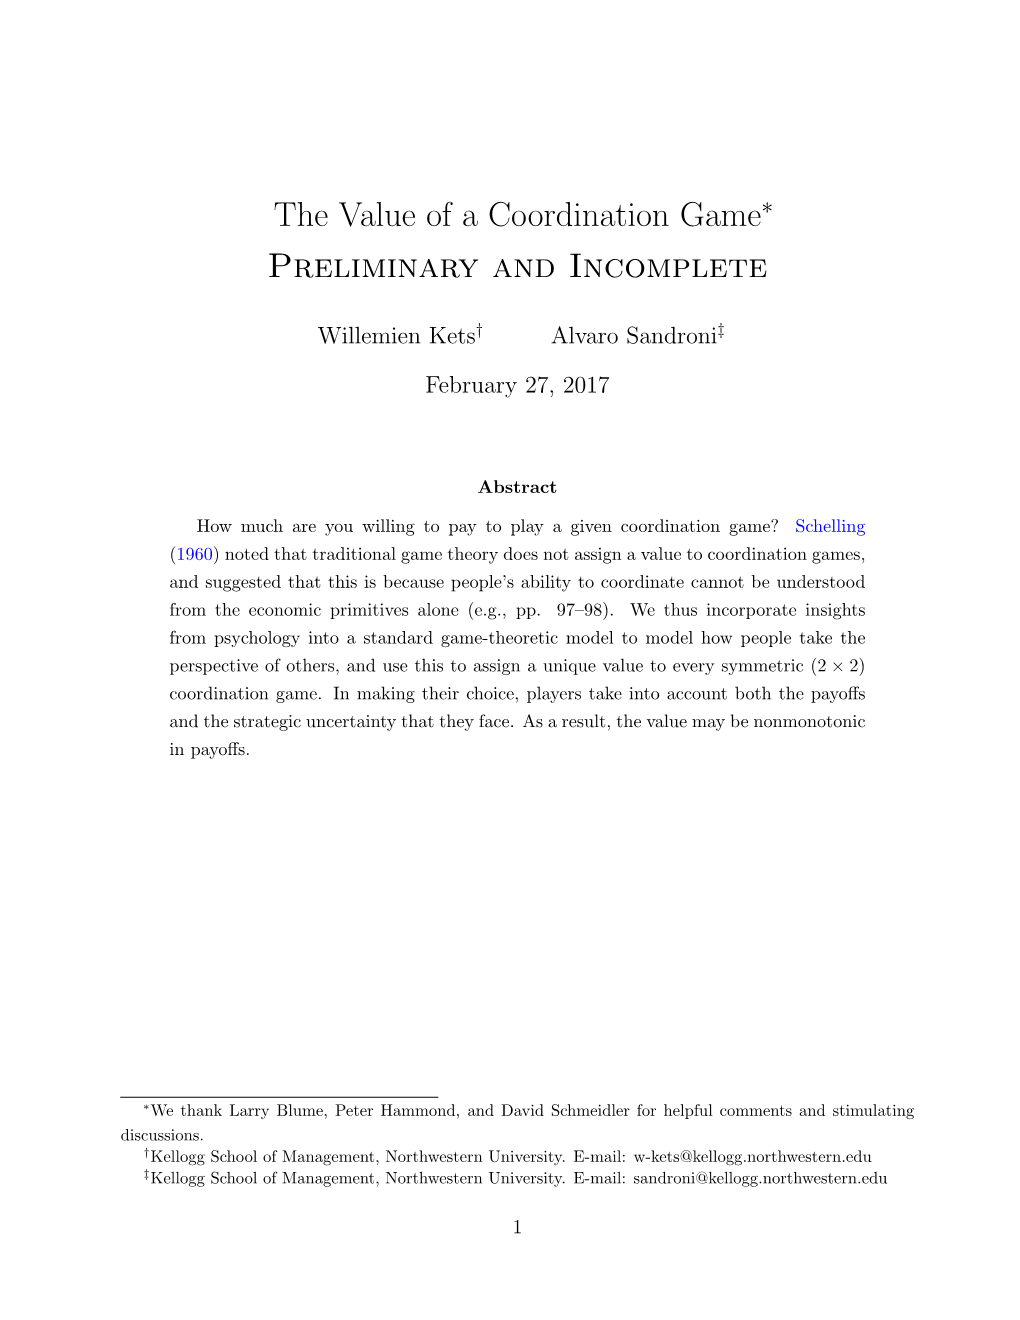 The Value of a Coordination Game Preliminary and Incomplete